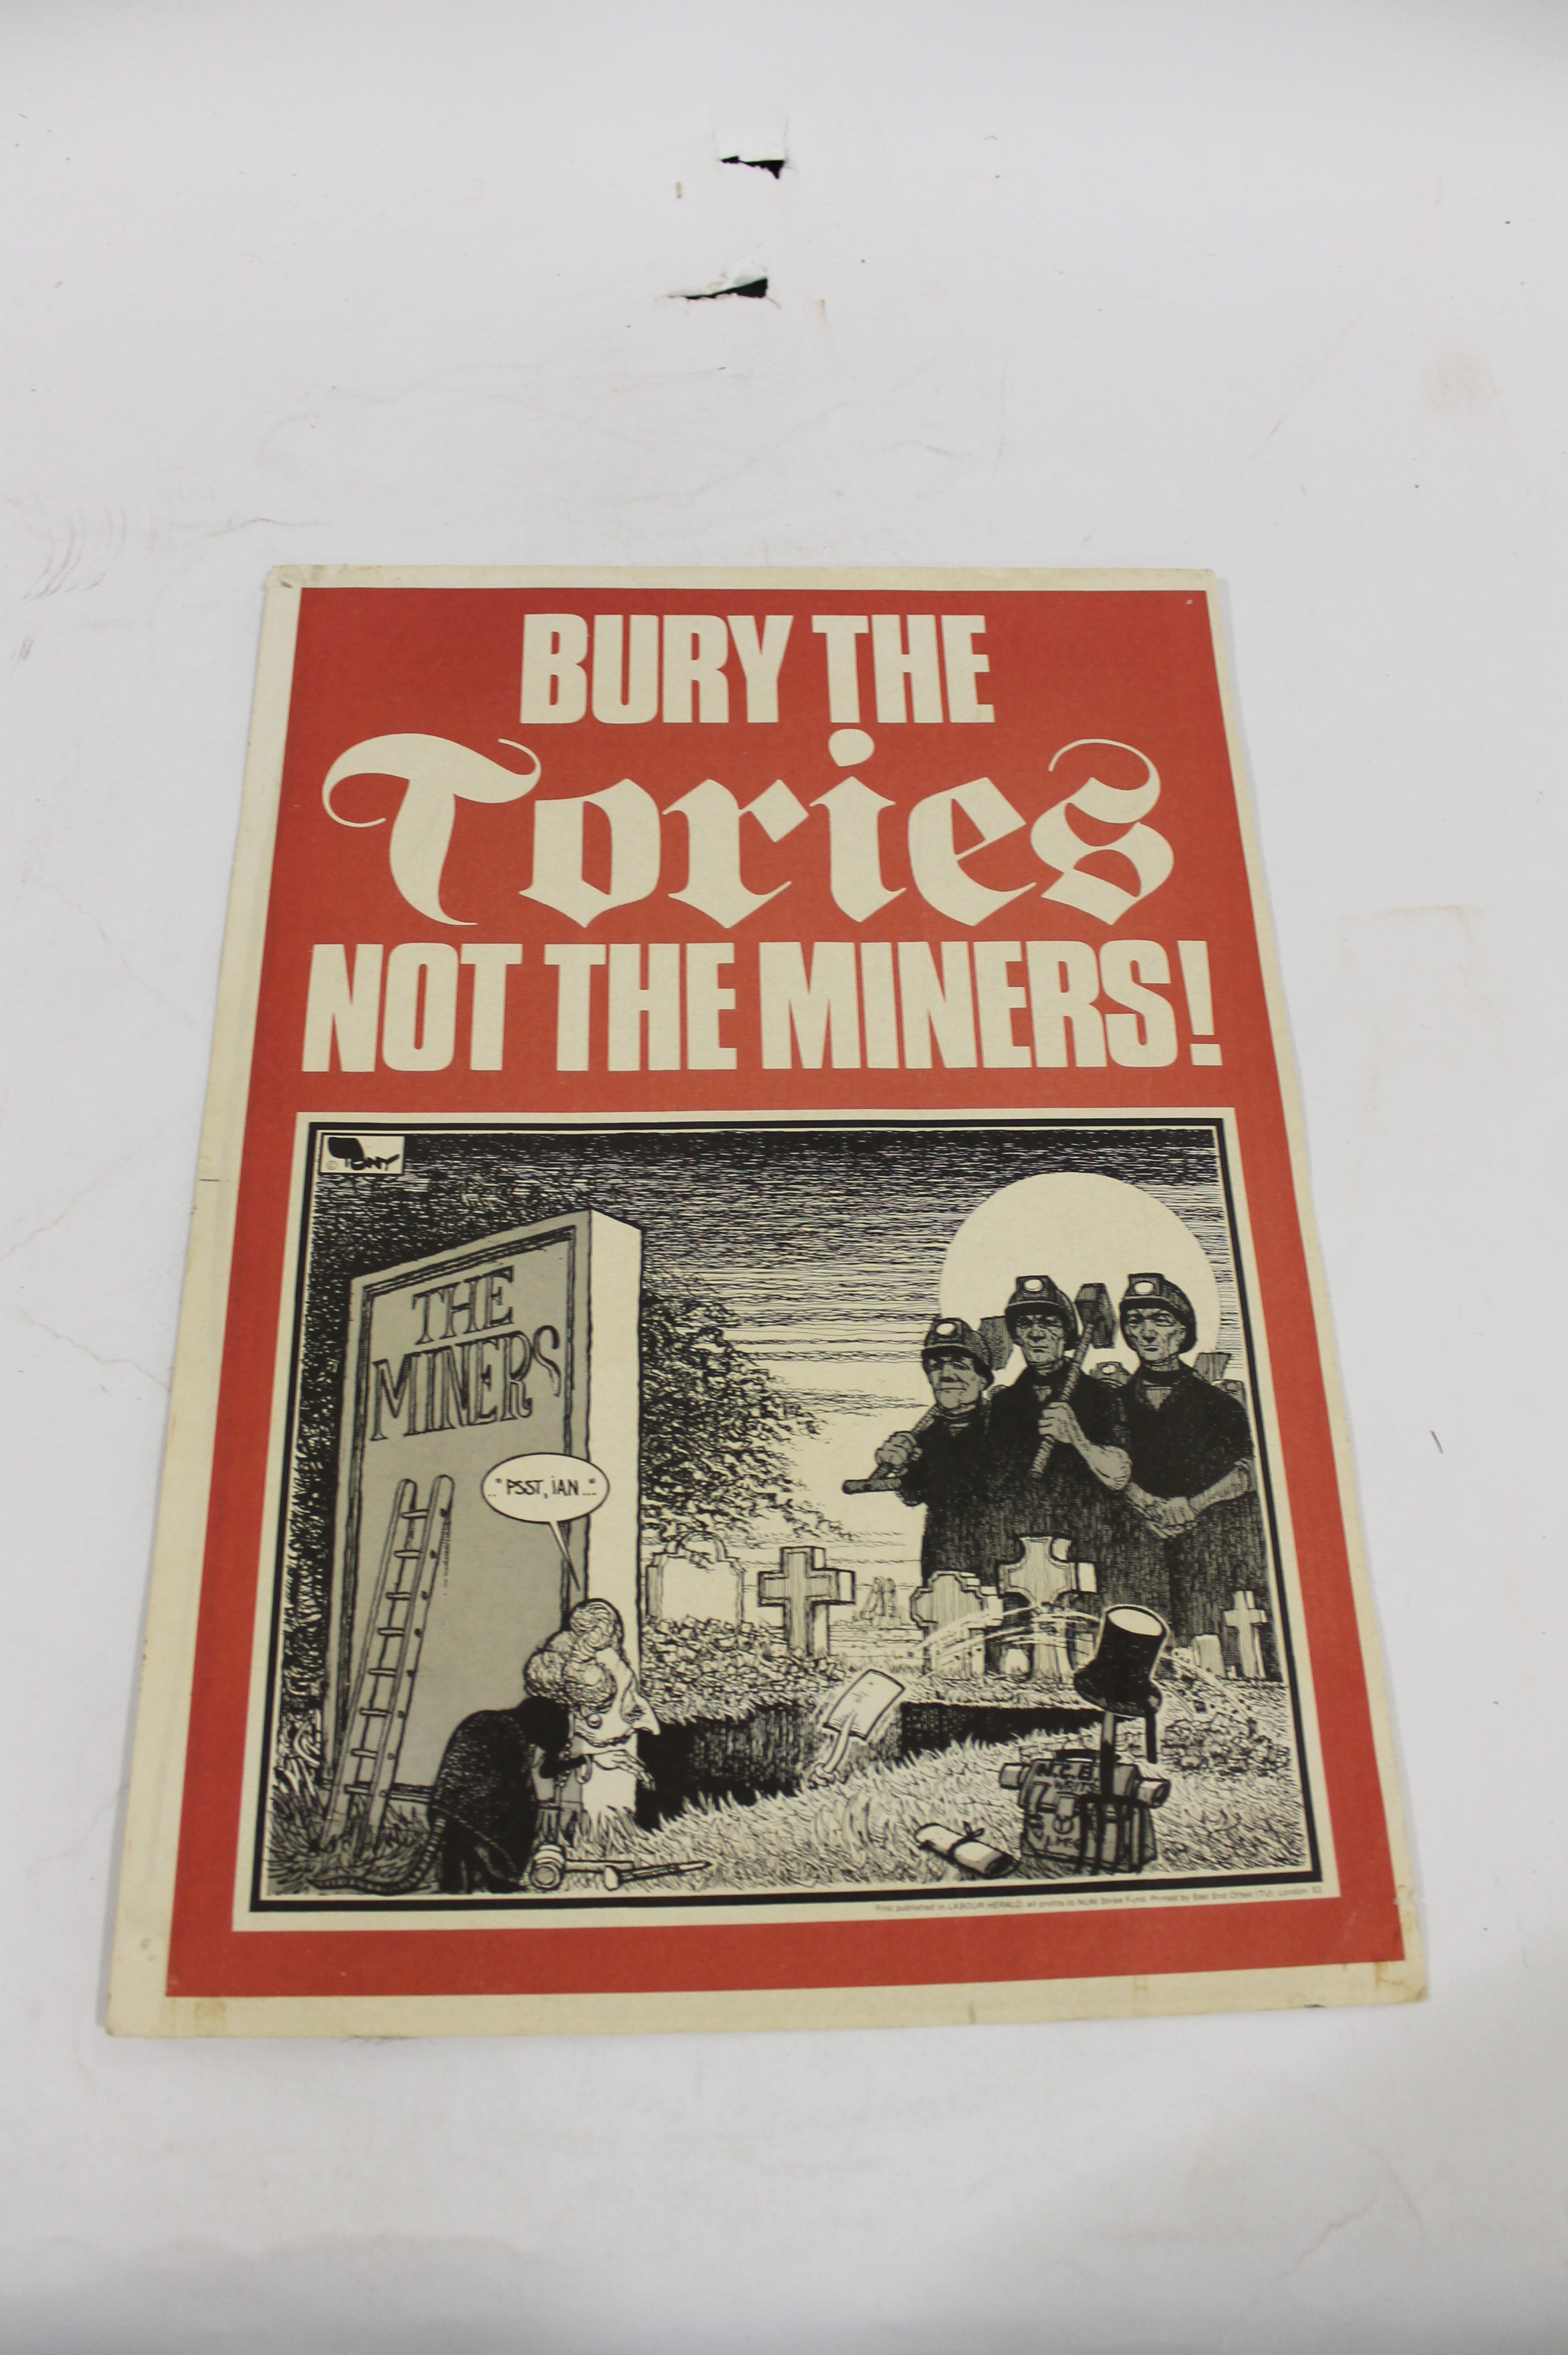 MINERS STRIKE POSTERS including Bury The Tories Not the Miners, Back the Miners says the Morning